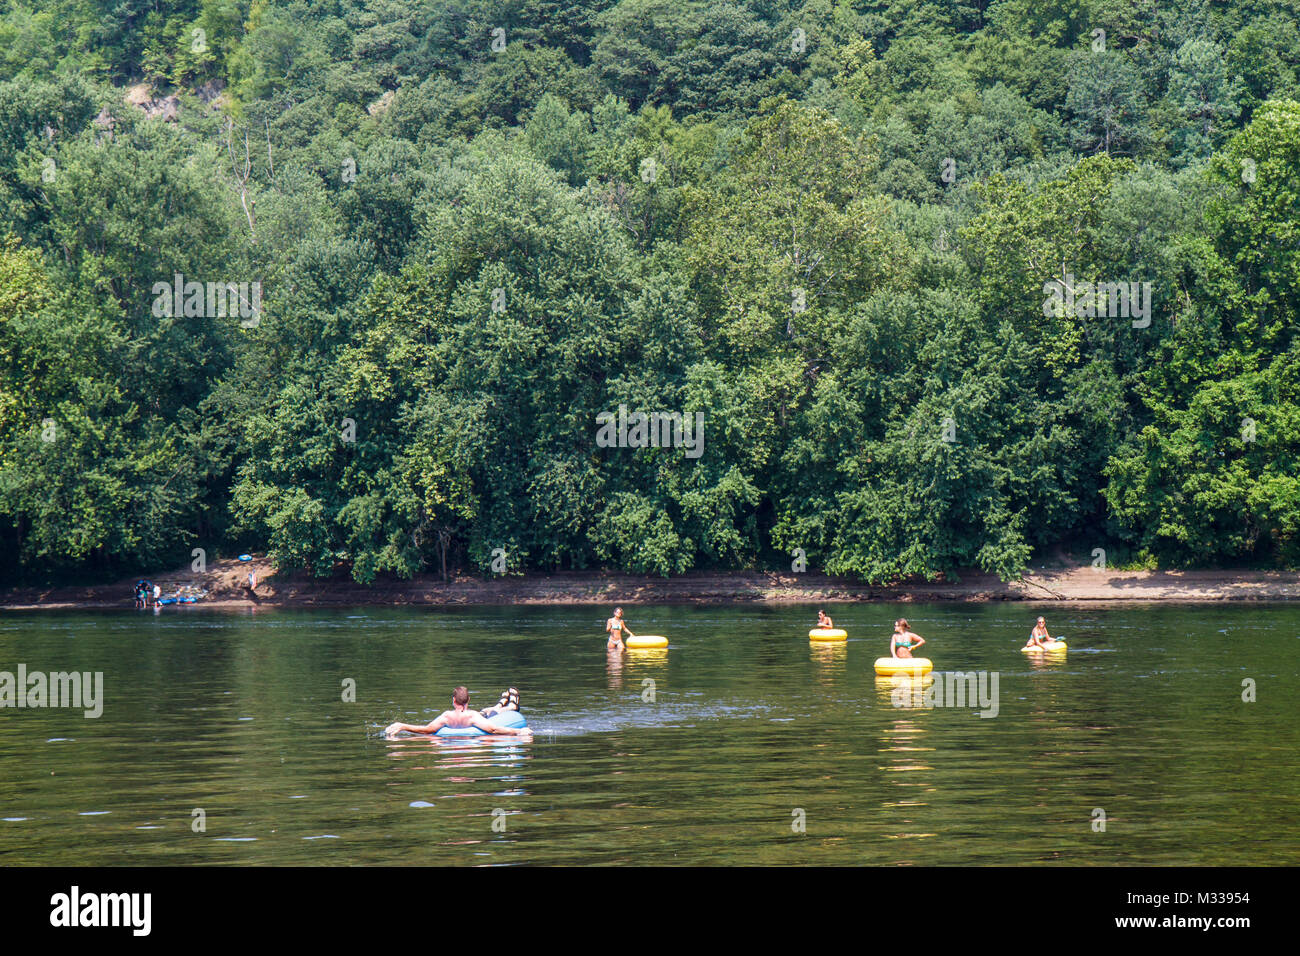 Pennsylvania Point Pleasant Delaware River Water, New Jersey Side Trees River Country Ausstatter Naturlandschaft, Tubing Erholung schwimmt mit Stockfoto